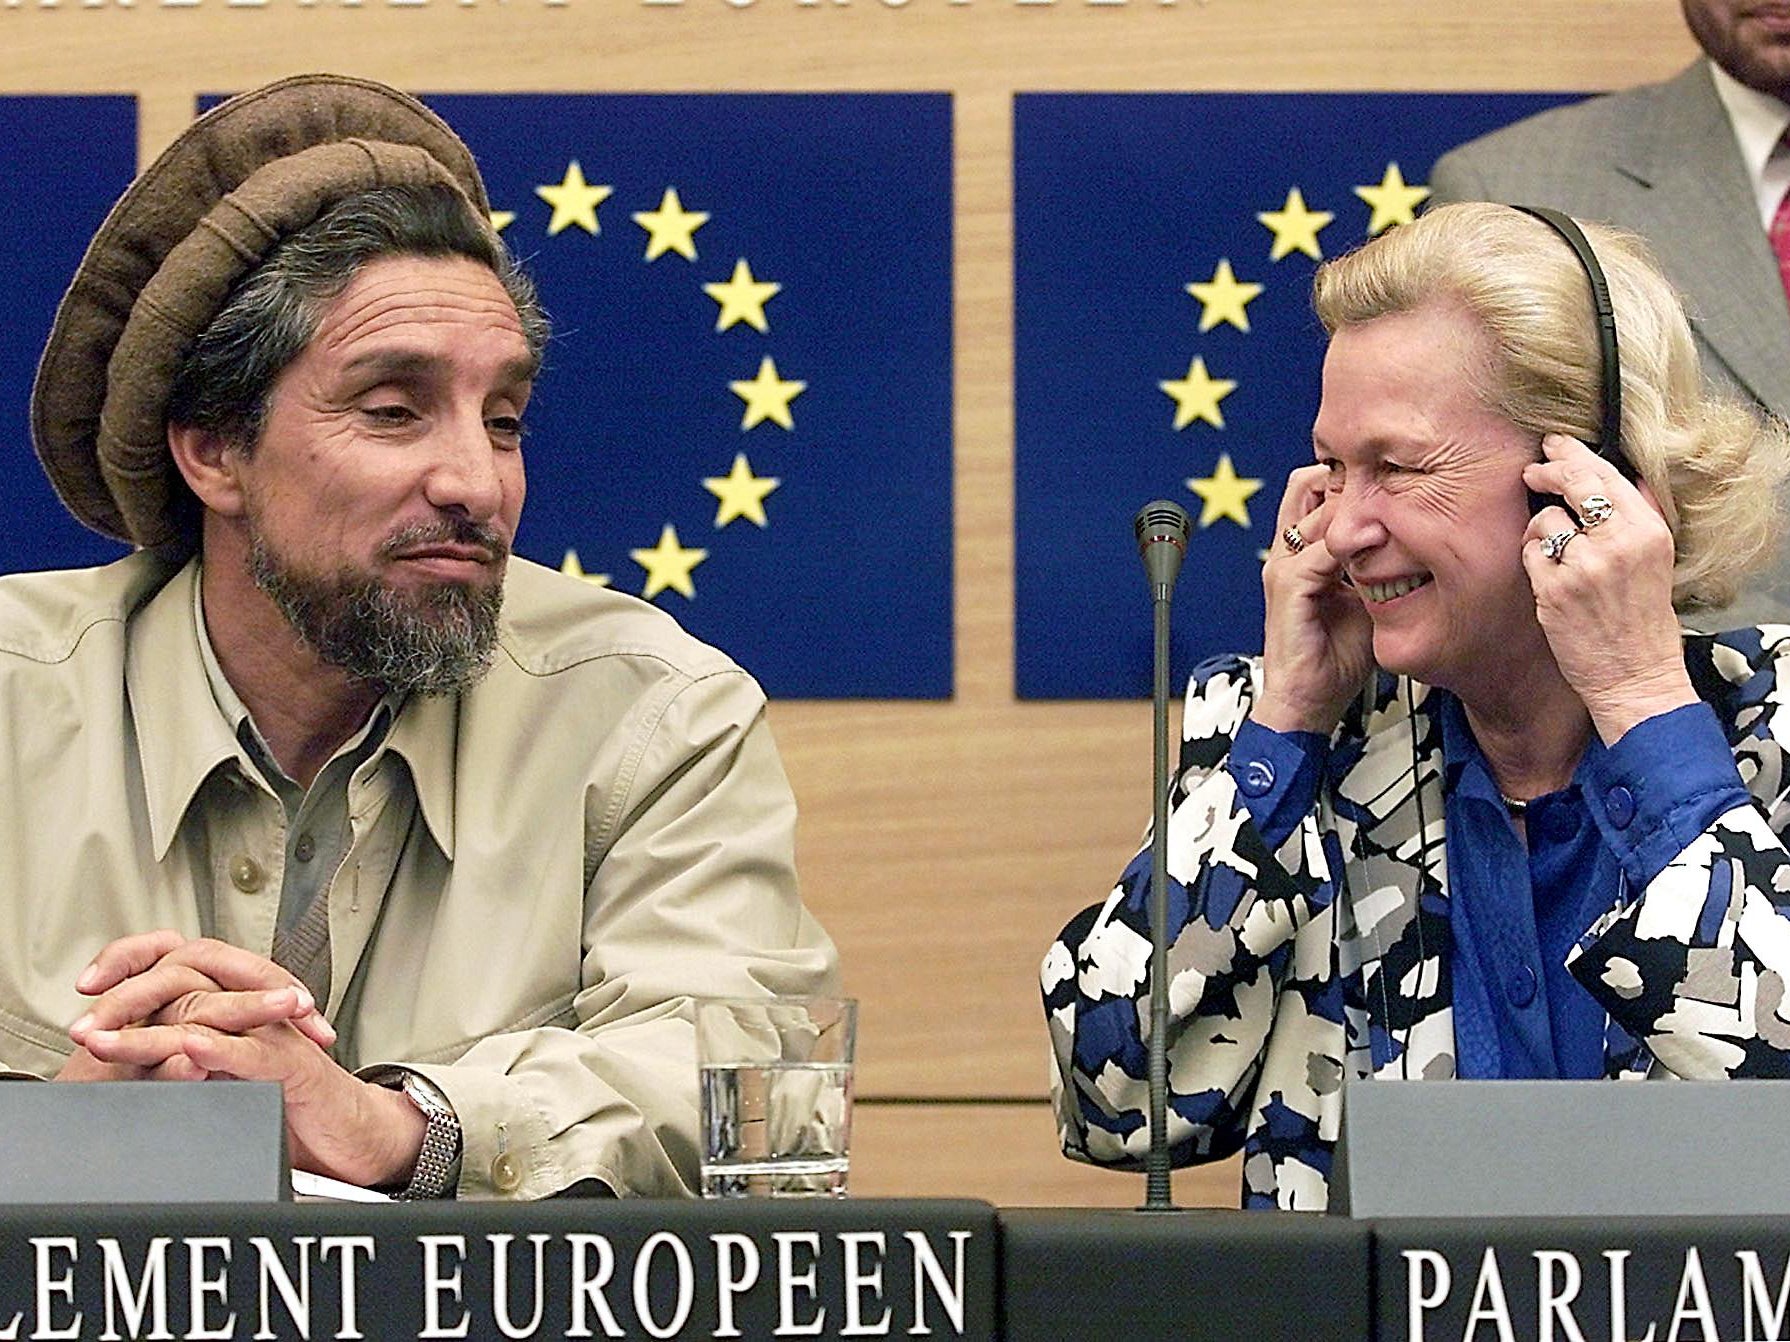 In 2001 Nicole Fontaine invited renowned Afghan Mujahideen leader Ahmad Shah Massoud to address the parliament